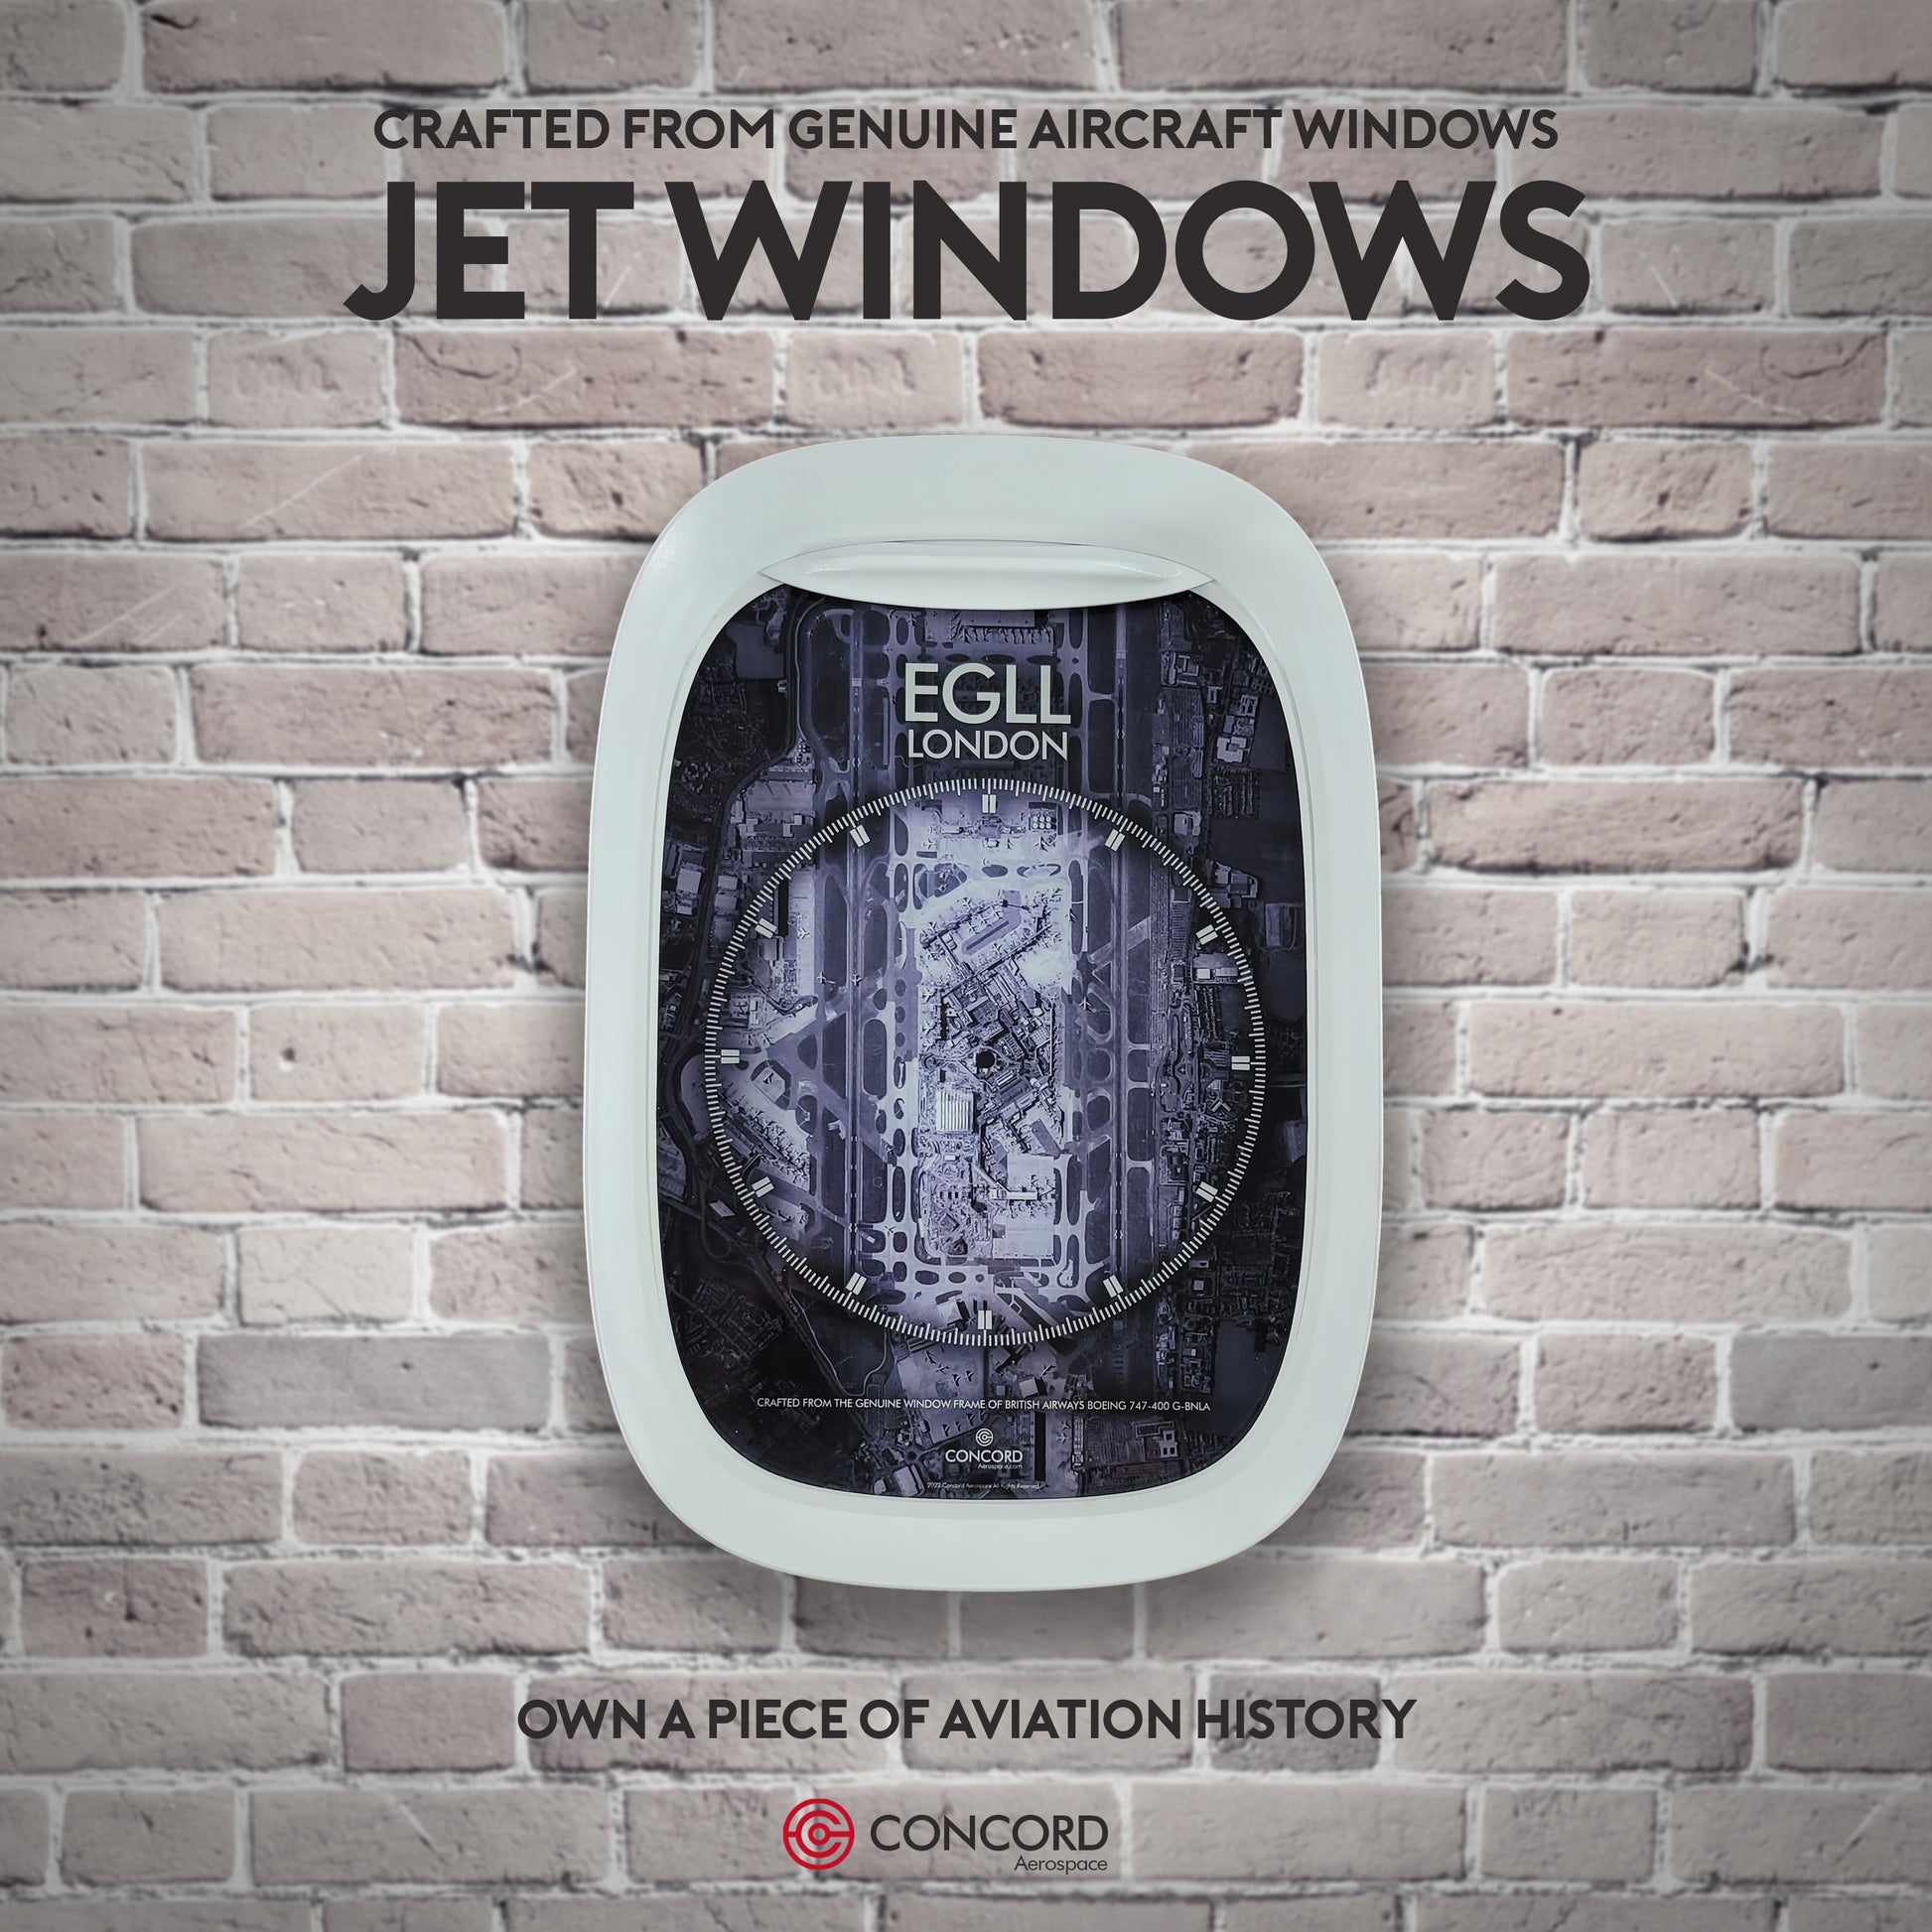 JET WINDOWS - PICTURE FRAMES CRAFTED FROM GENUINE AIRCRAFT WINDOWS - Concord Aerospace Concord Aerospace Concord Aerospace JETWINDOW